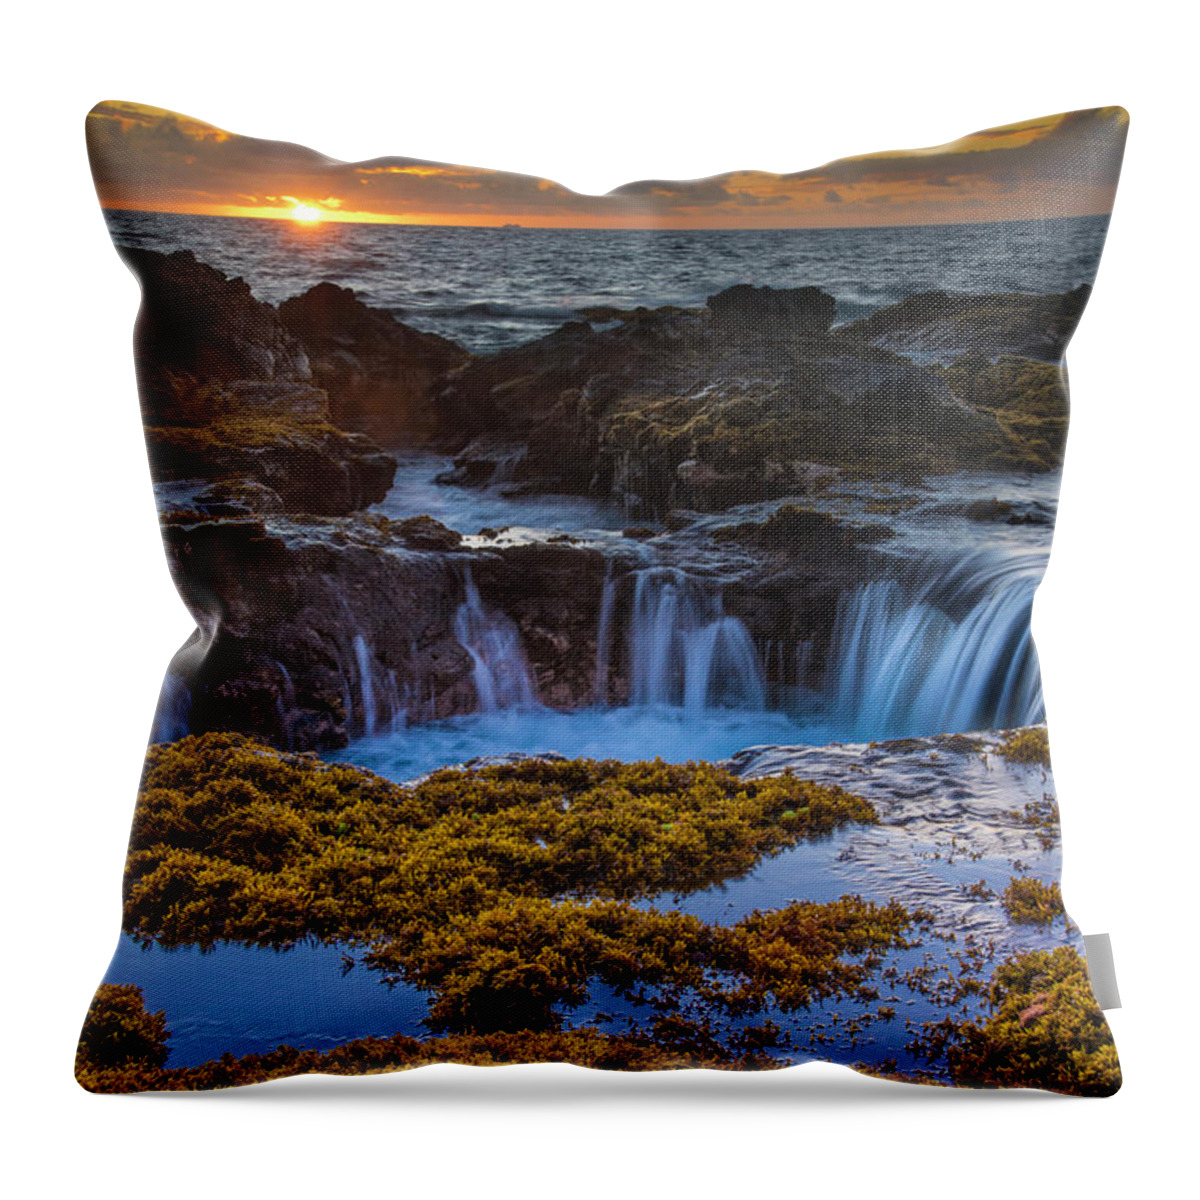 Hawaii Throw Pillow featuring the photograph Tidal Pools in Hawaii by Bill Cubitt